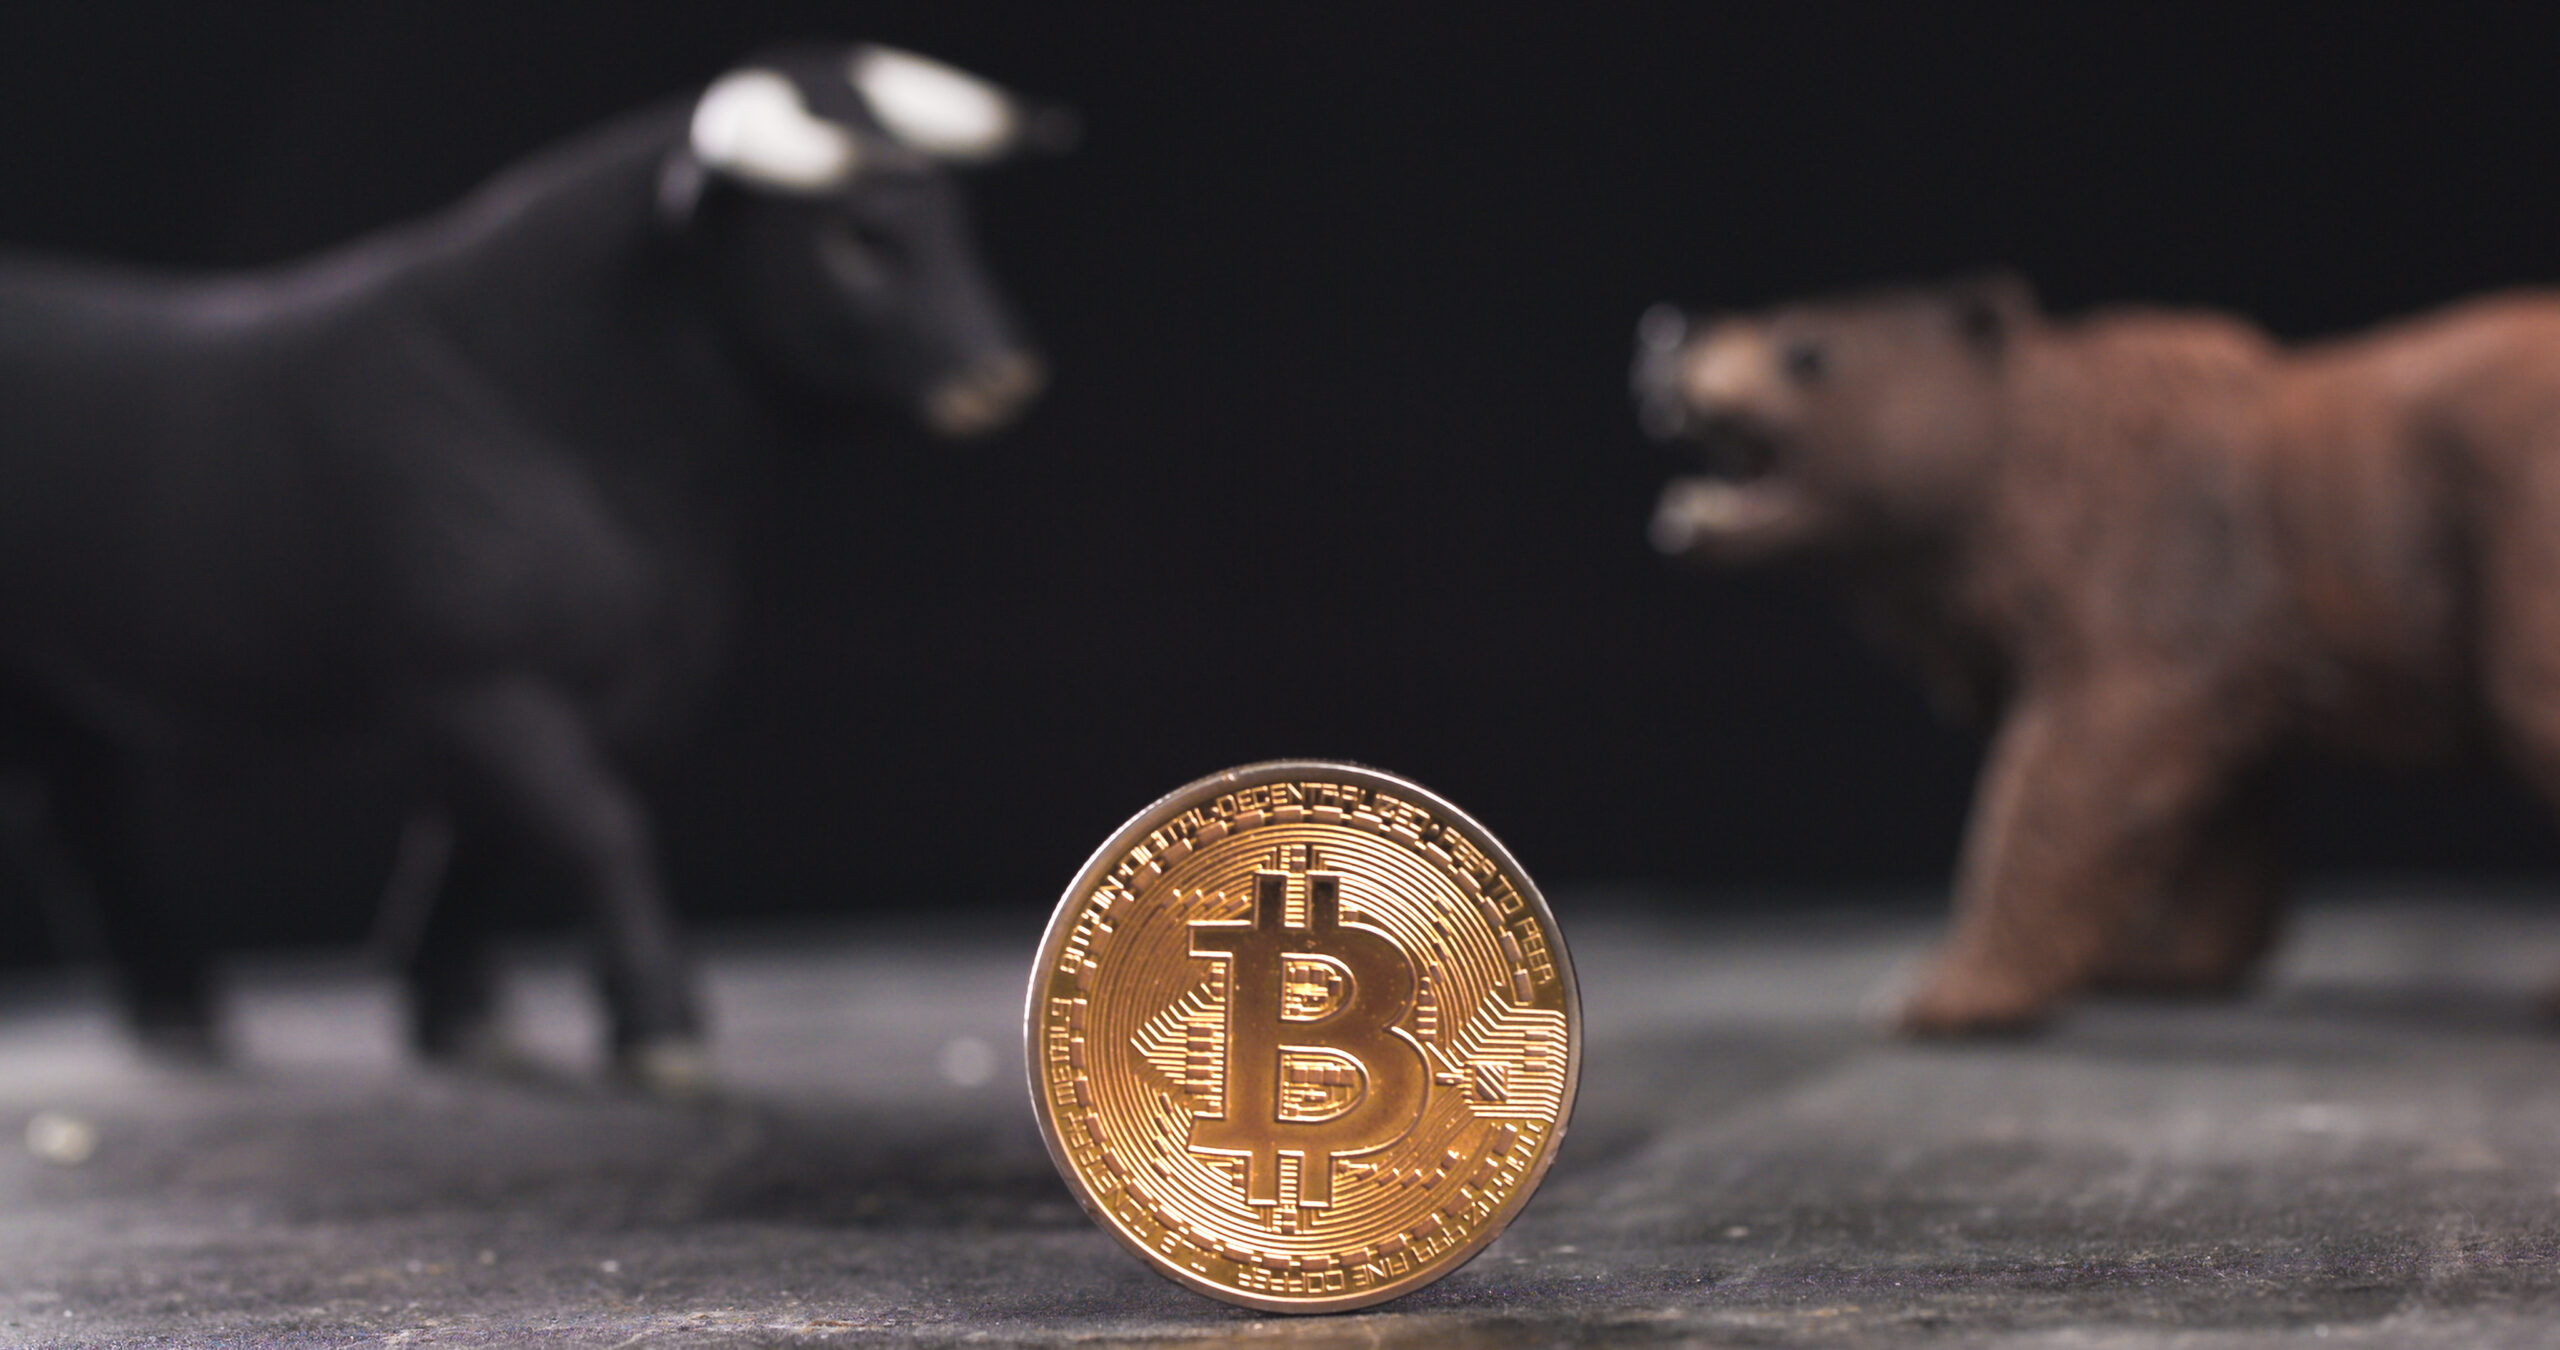 Bitcoin Primed for Volatility as Analysts Debate Its Long-Term Outlook